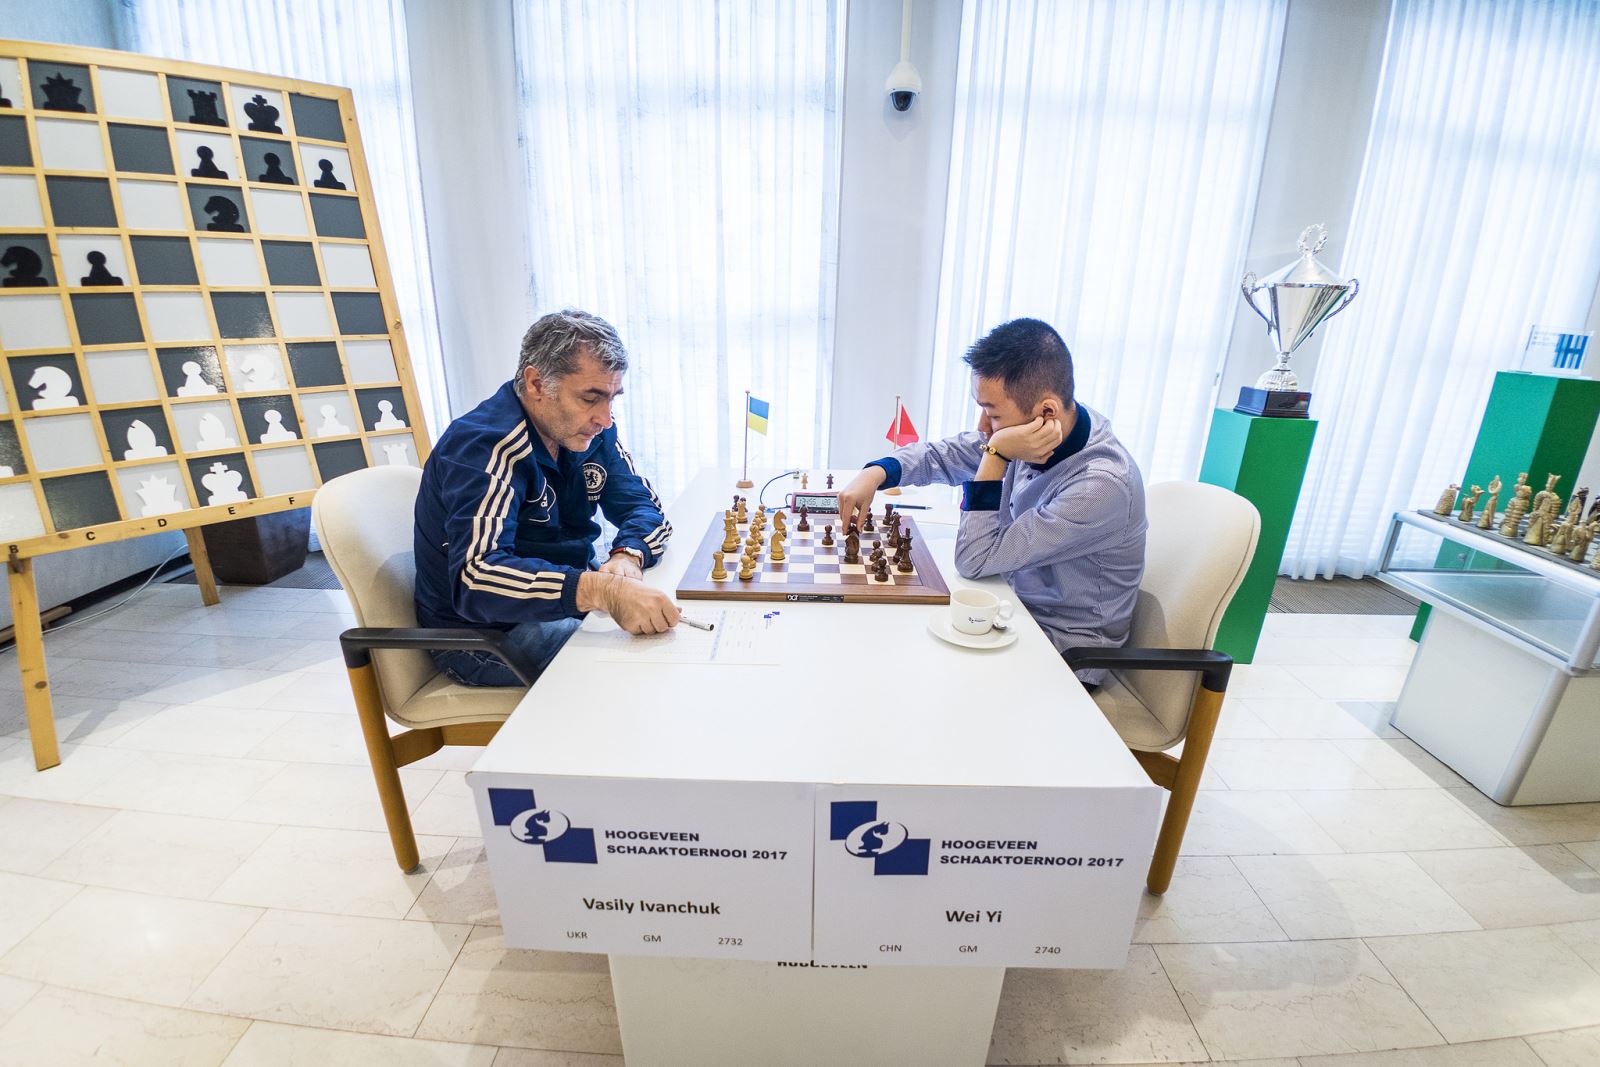 Vassily Ivanchuk and Wei Yi playing their fifth round game